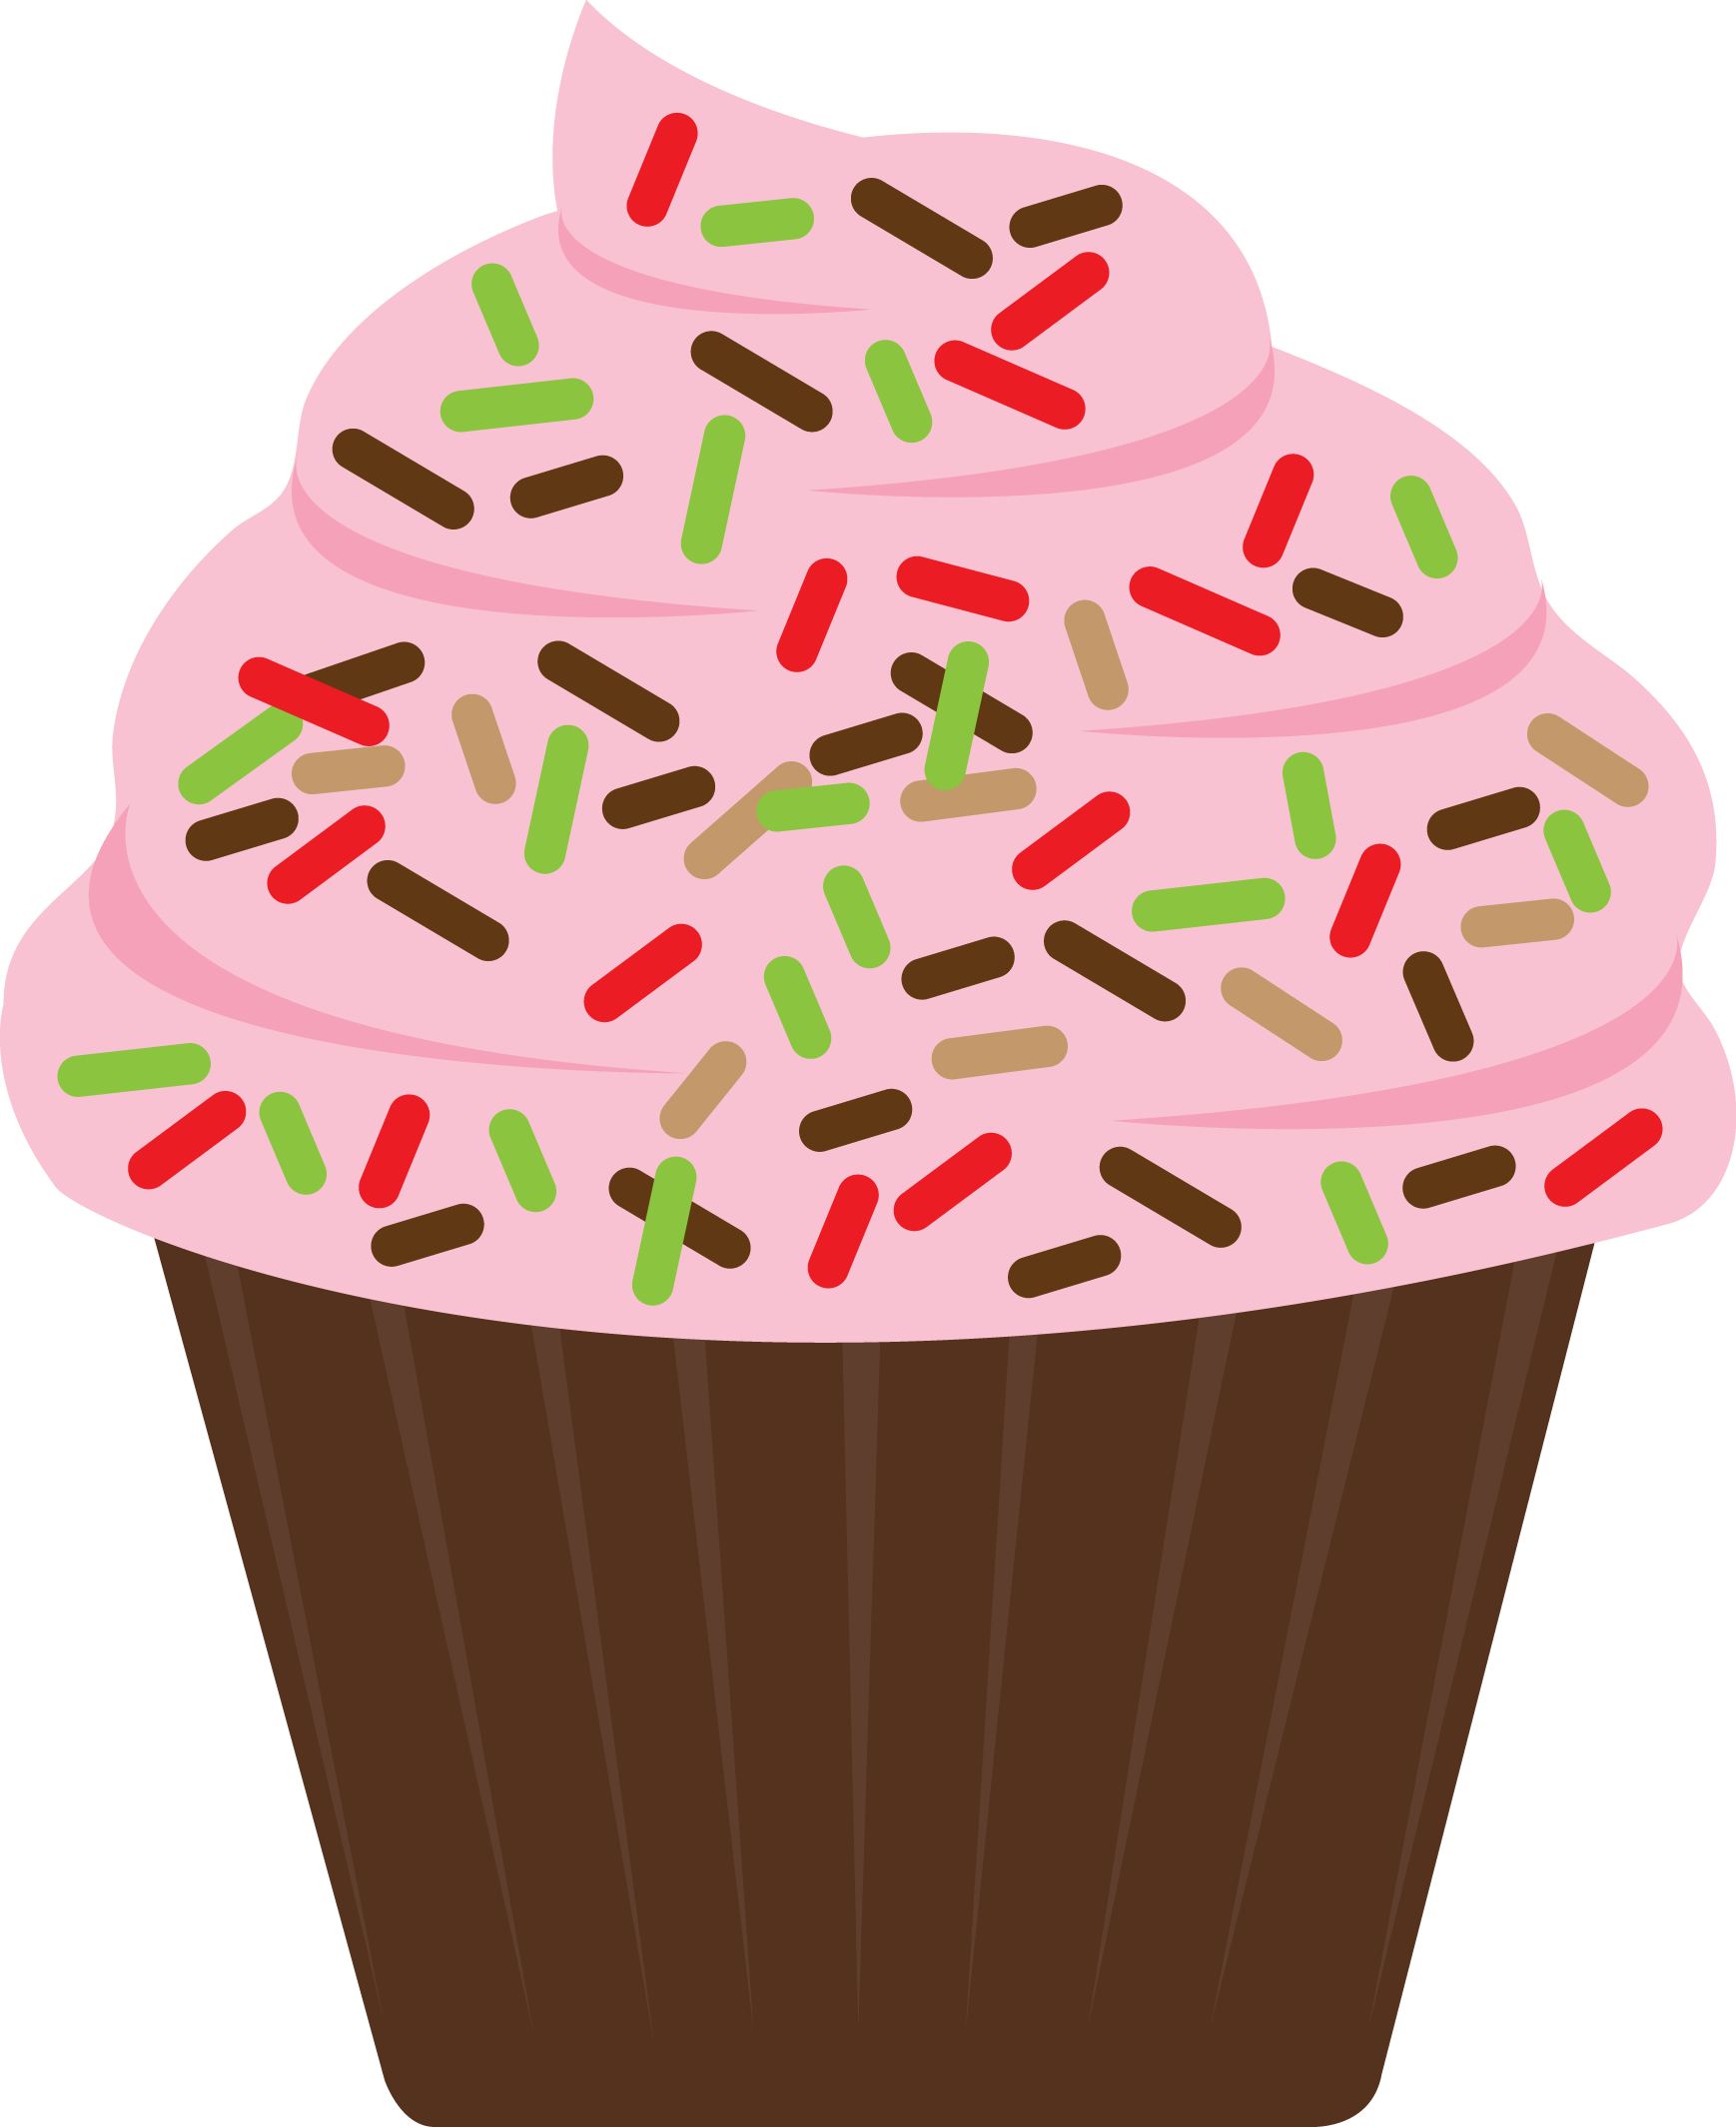 muffins clipart bake sale item